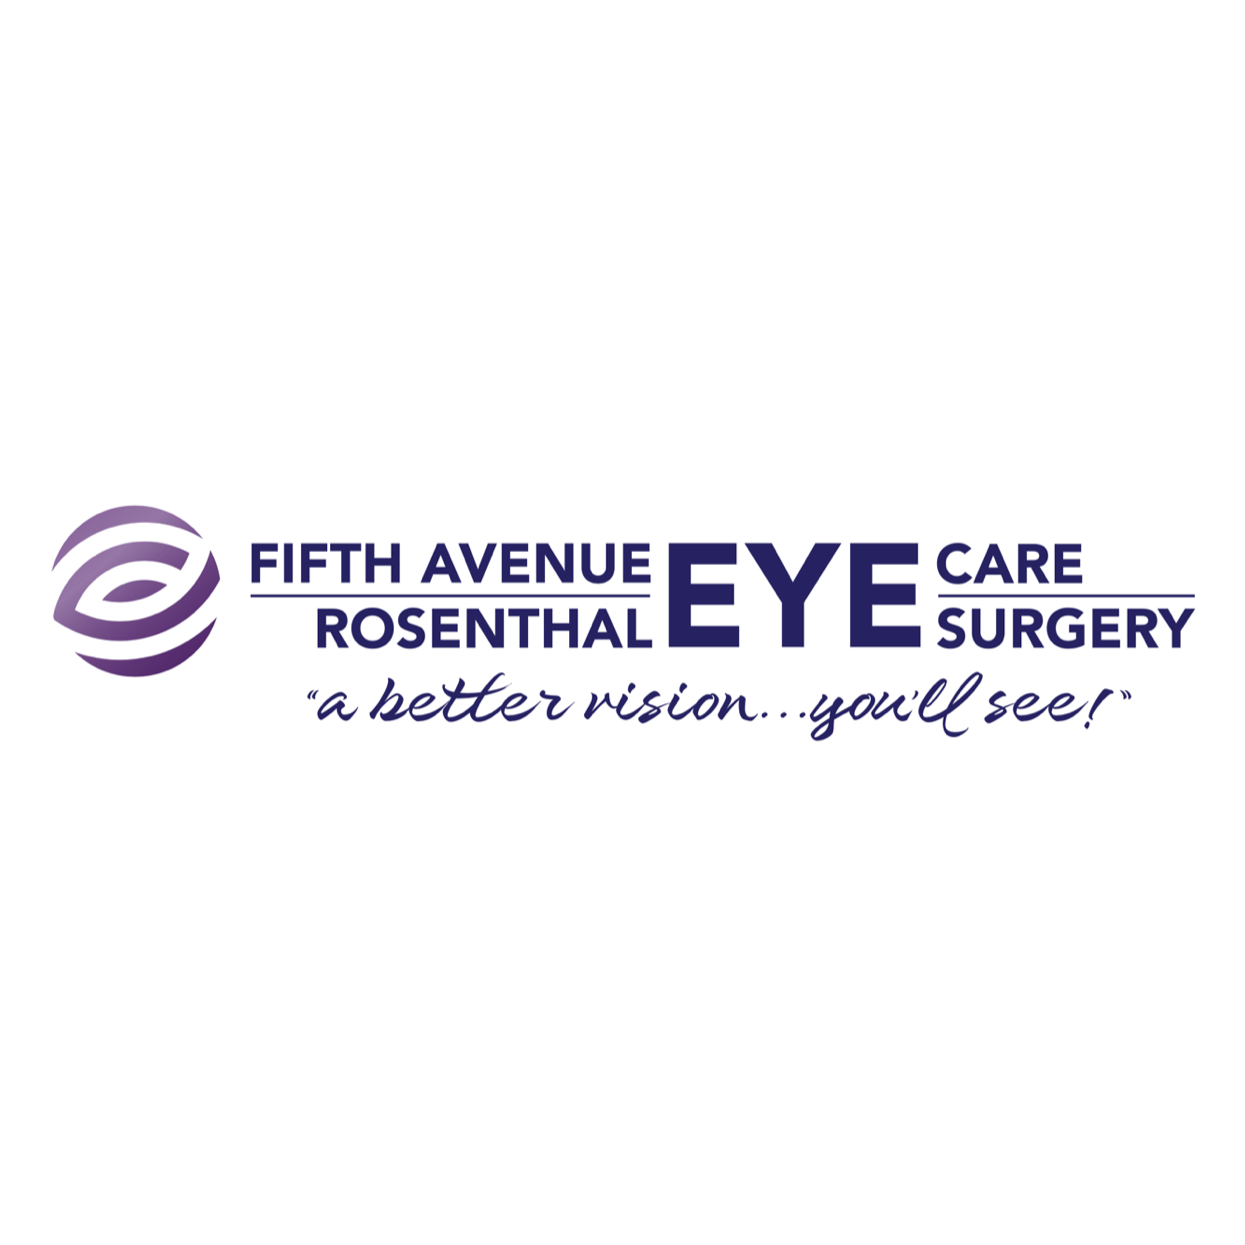 Fifth Avenue EyeCare & Rosenthal Eye Surgery - New York, NY 10028 - (212)517-4500 | ShowMeLocal.com